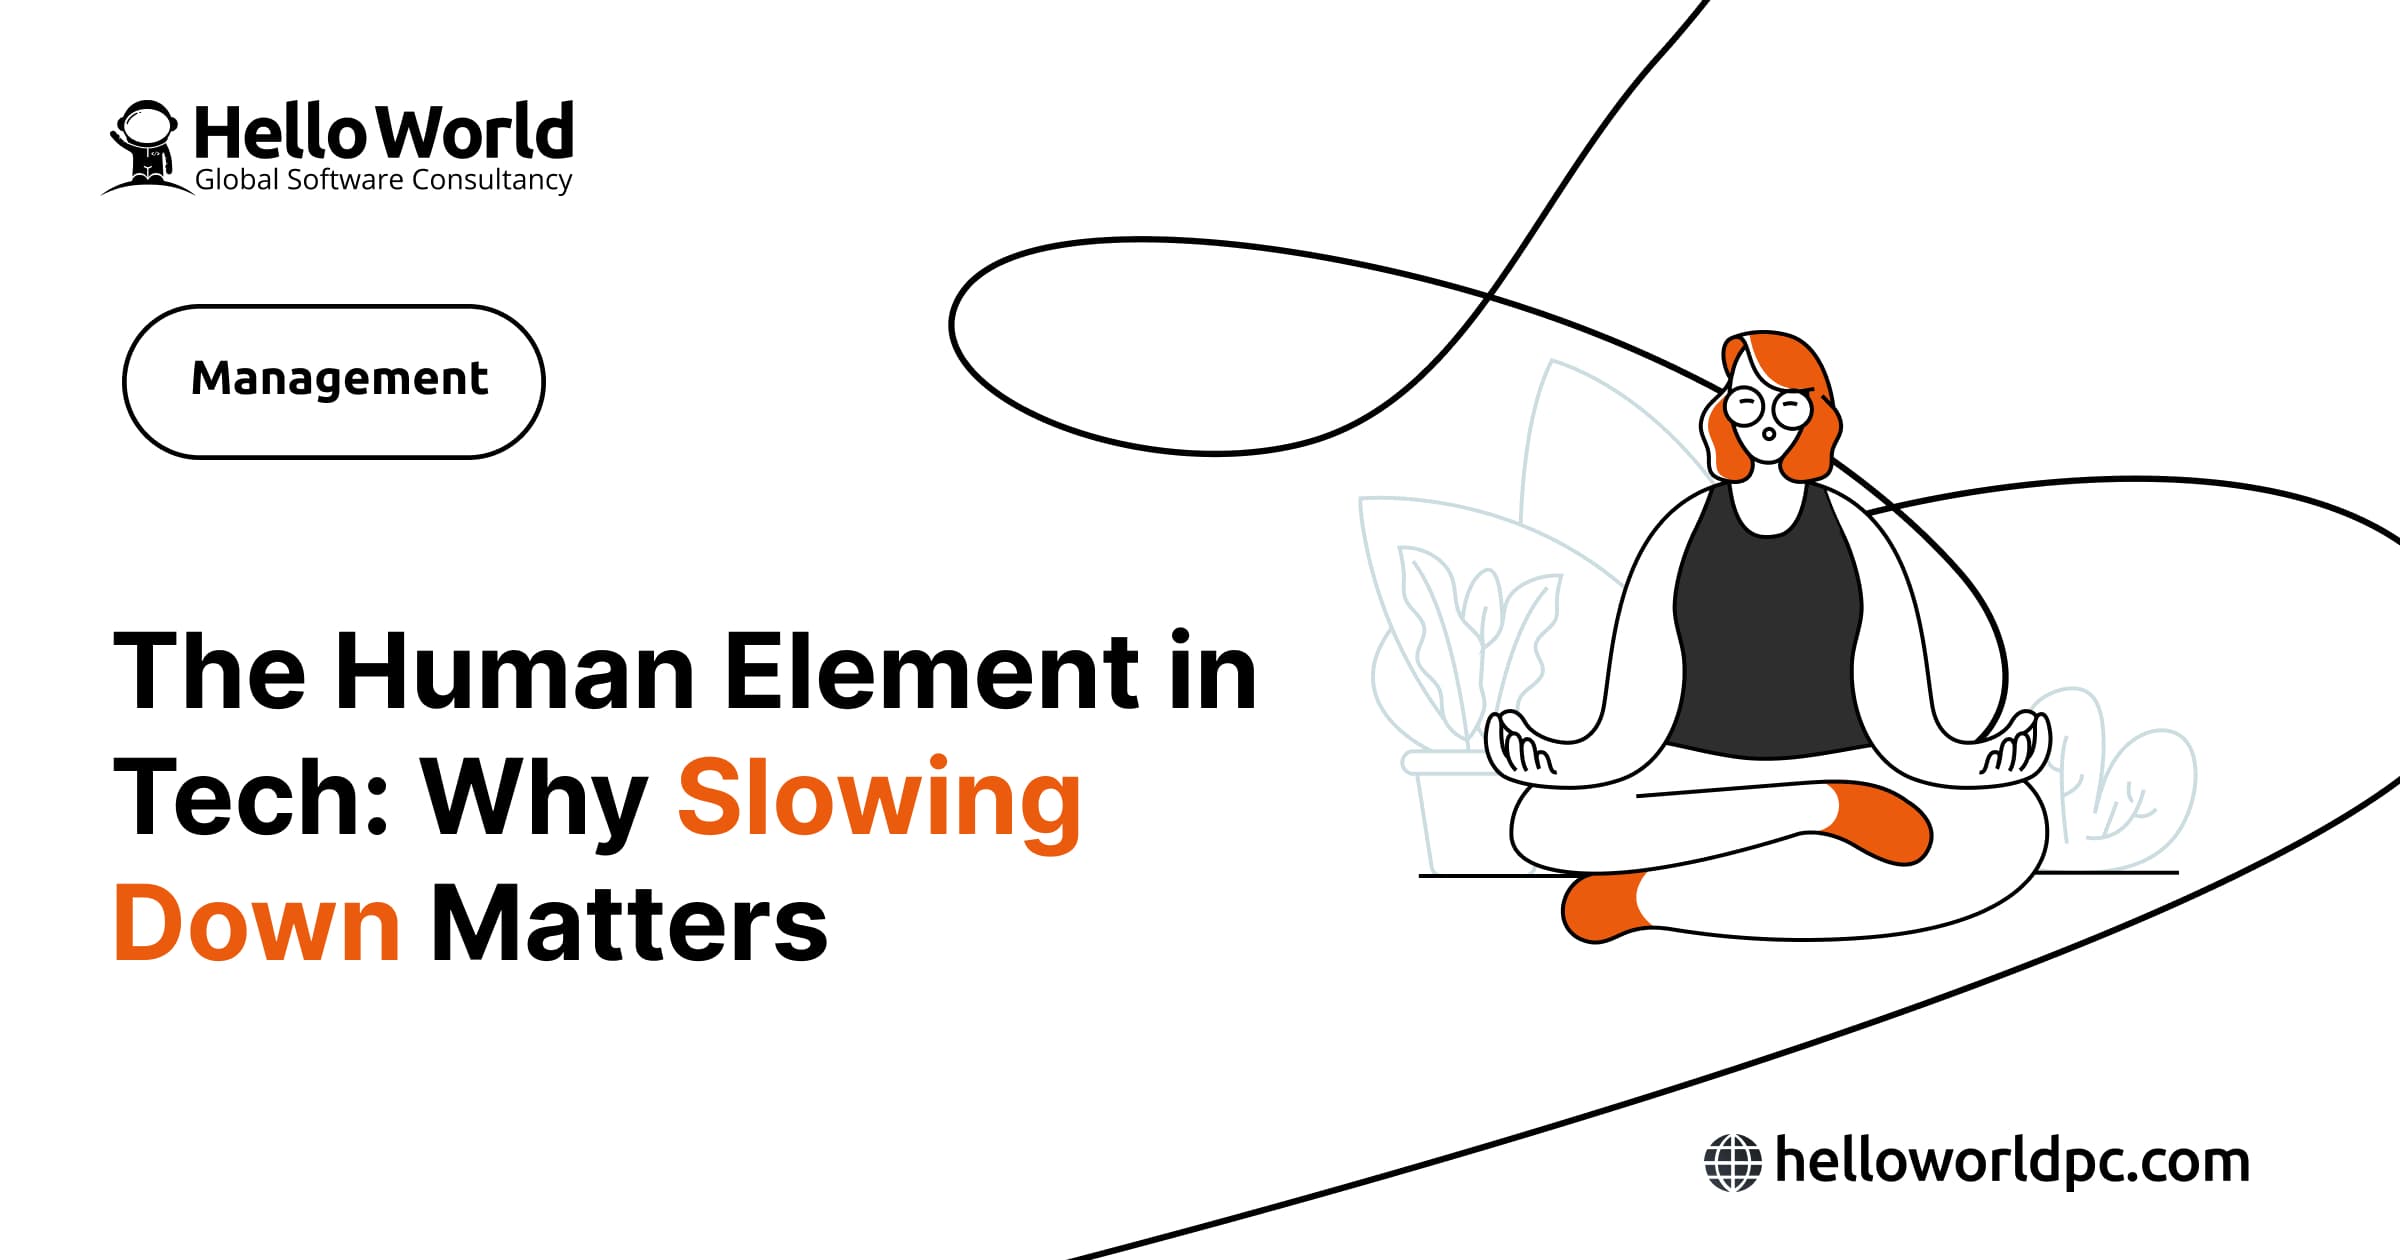 The Human Element in Tech: Why Slowing Down Matters